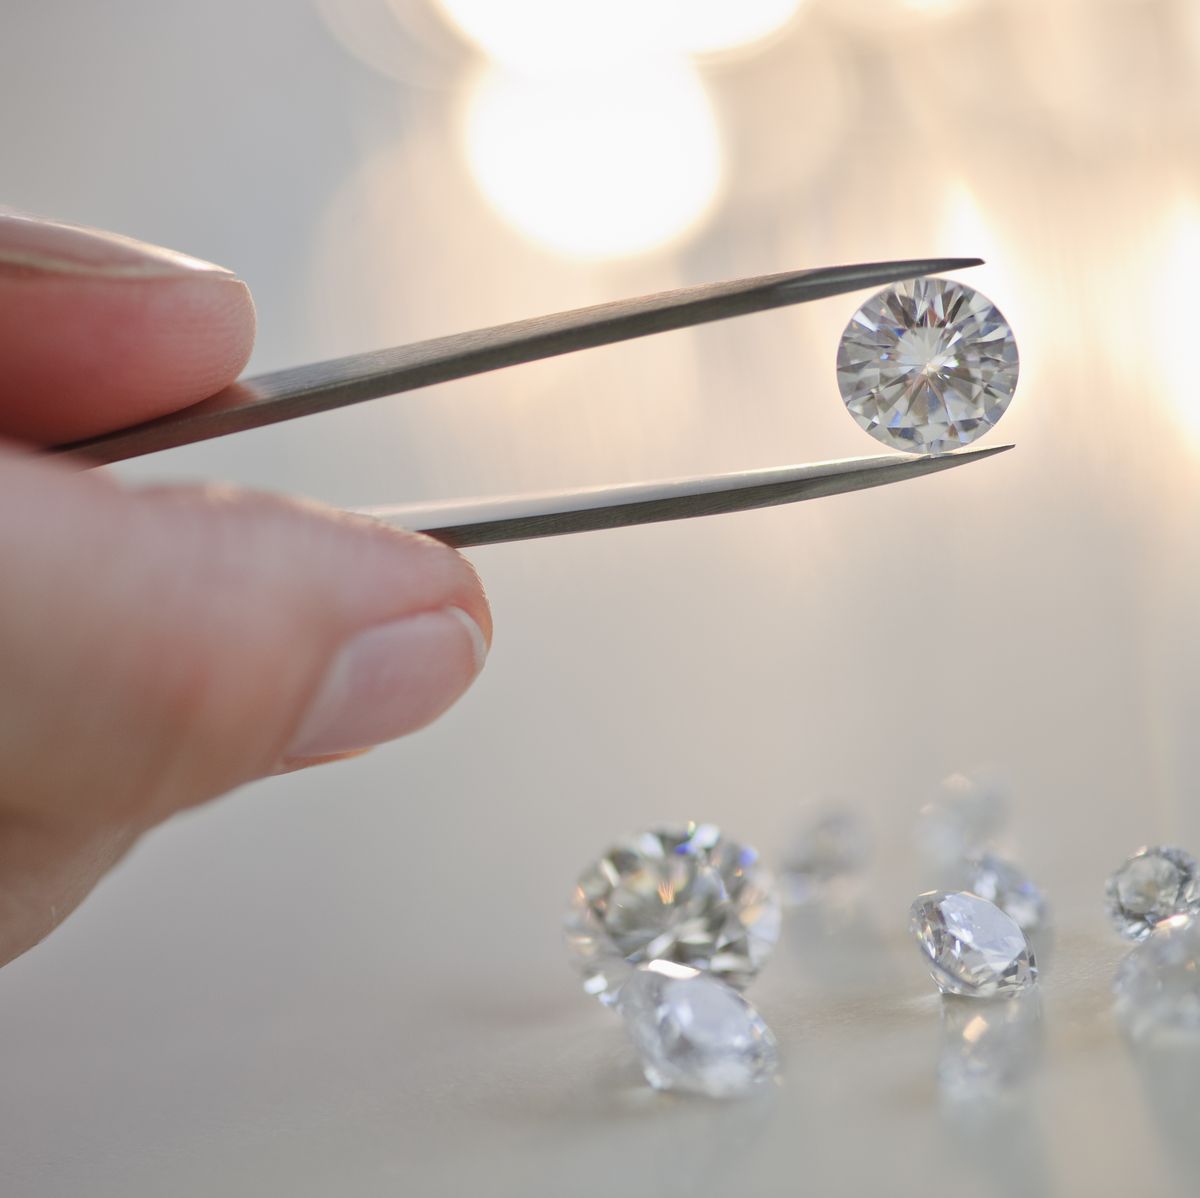 How (and When) to Clean Your Jewelry